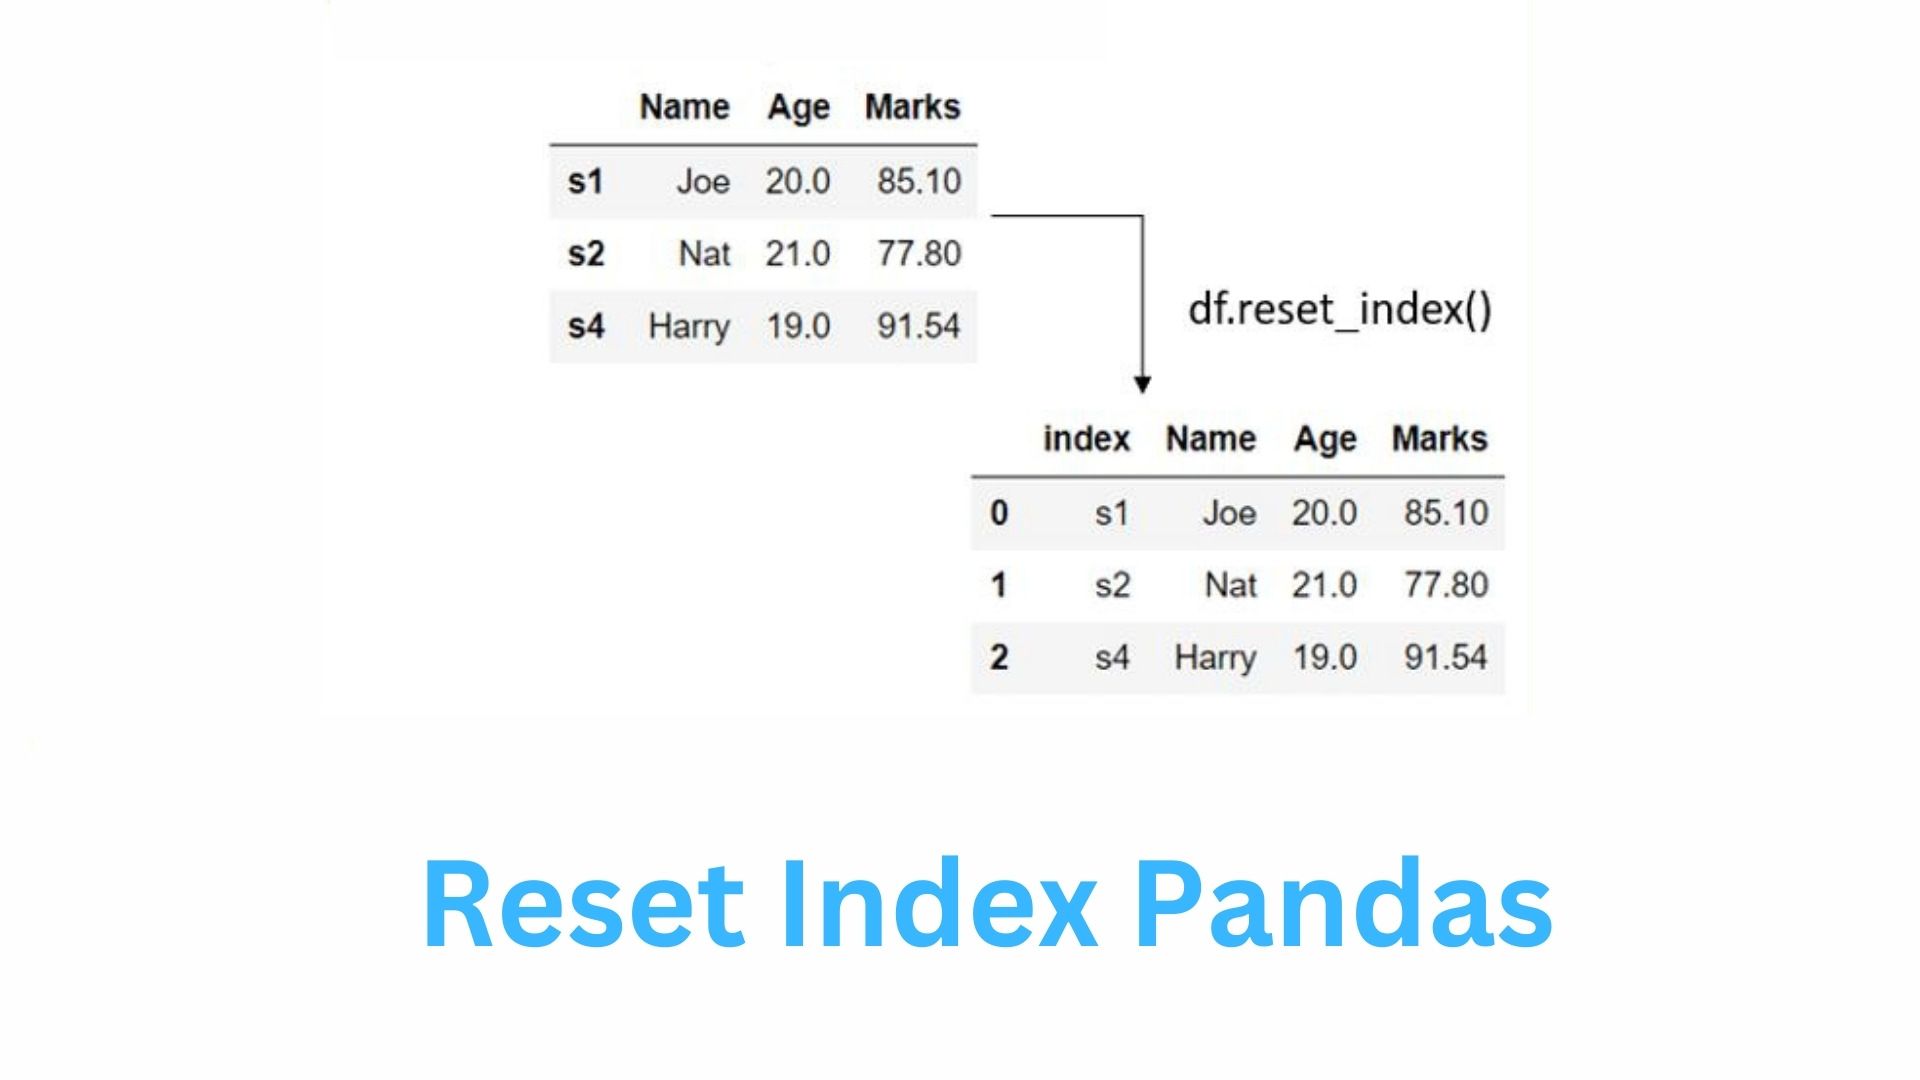 Learn about Reset Index Pandas